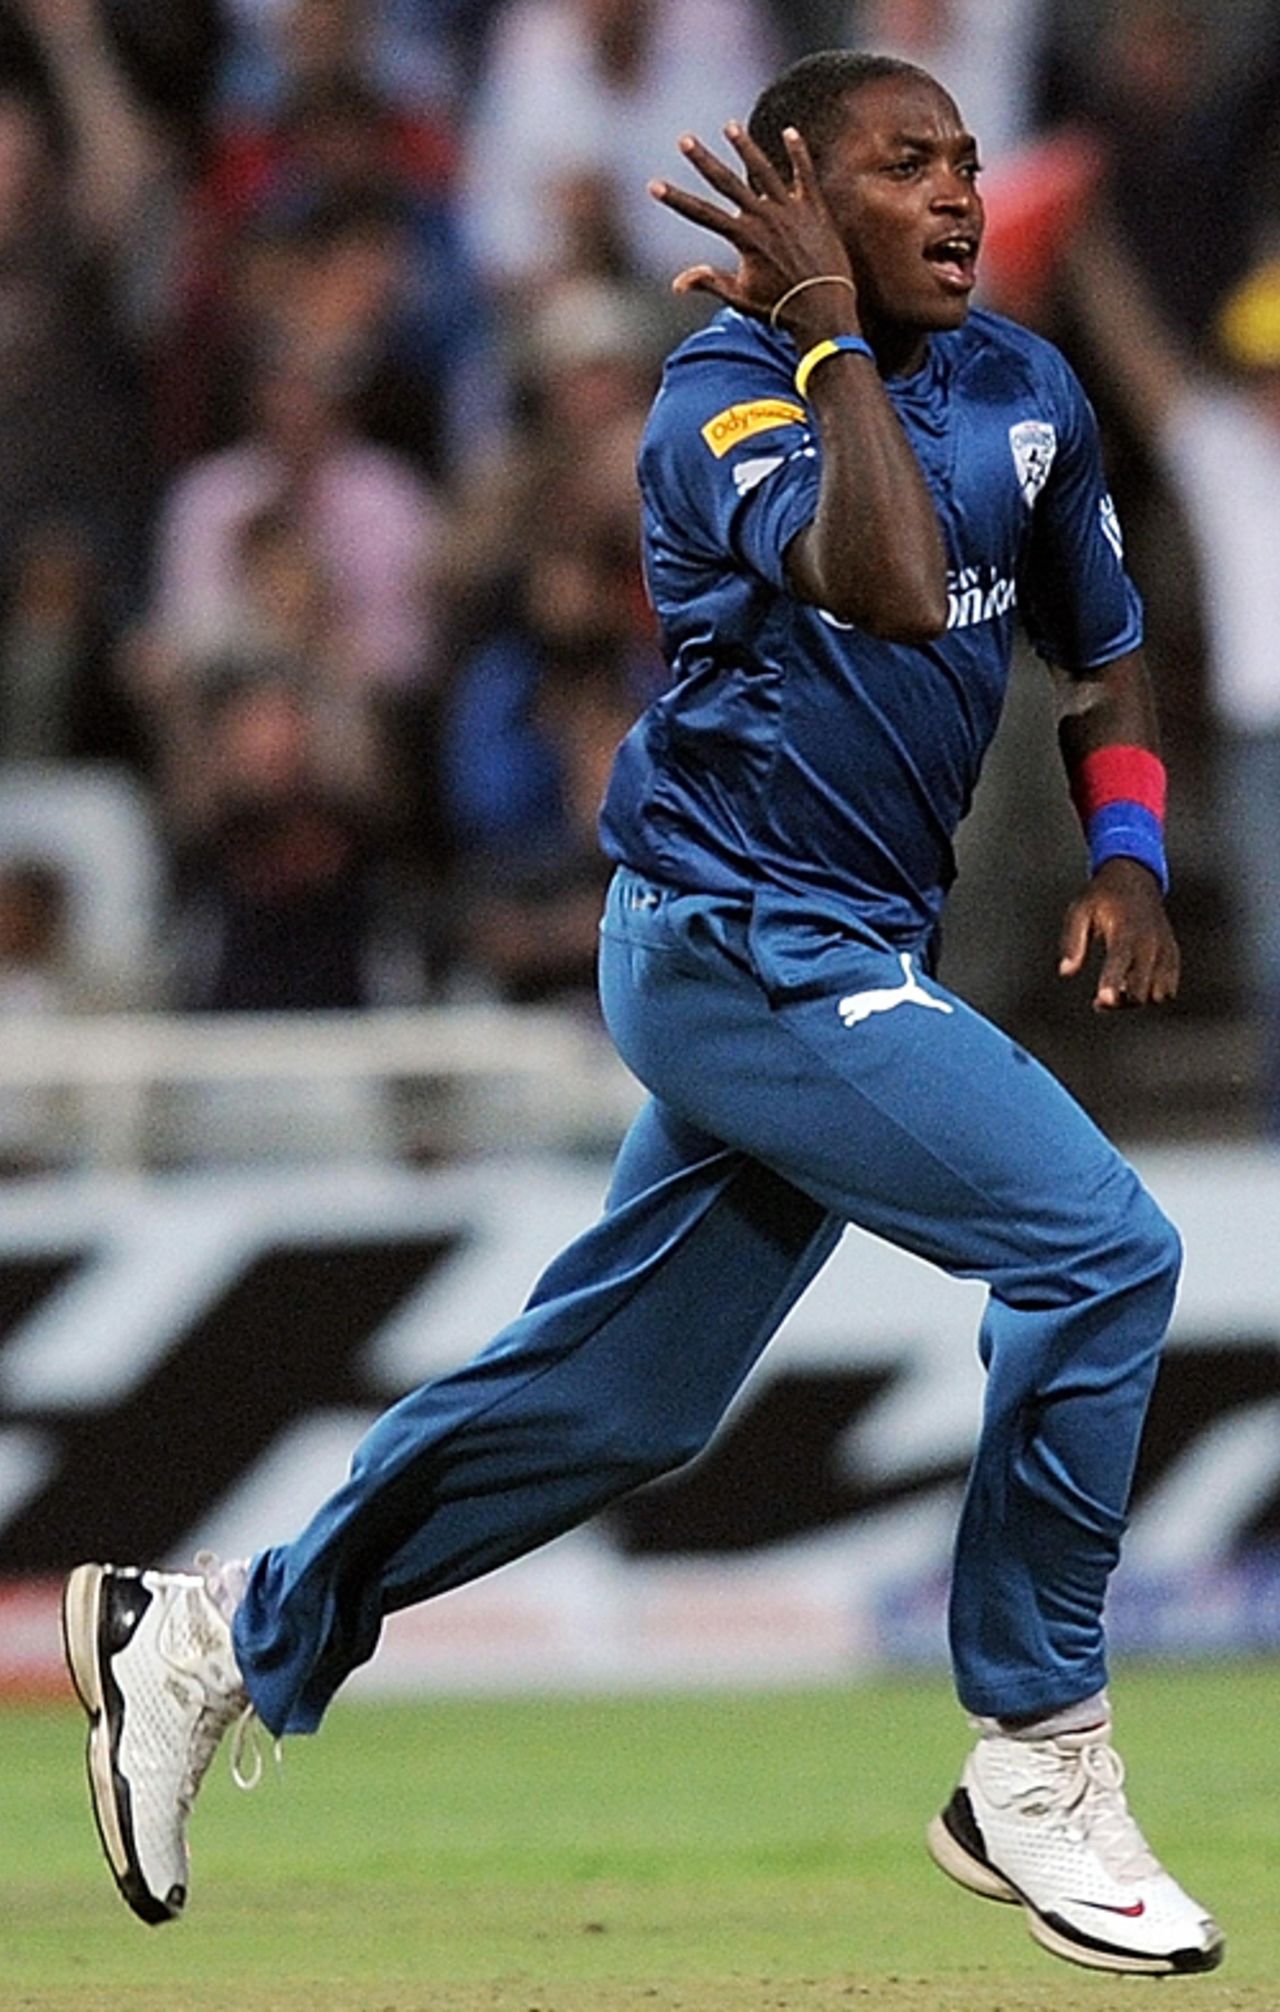 Fidel Edwards goes off on a celebration run, Bangalore Royal Challengers v Deccan Chargers, IPL, 8th game, Cape Town, April 22, 2009